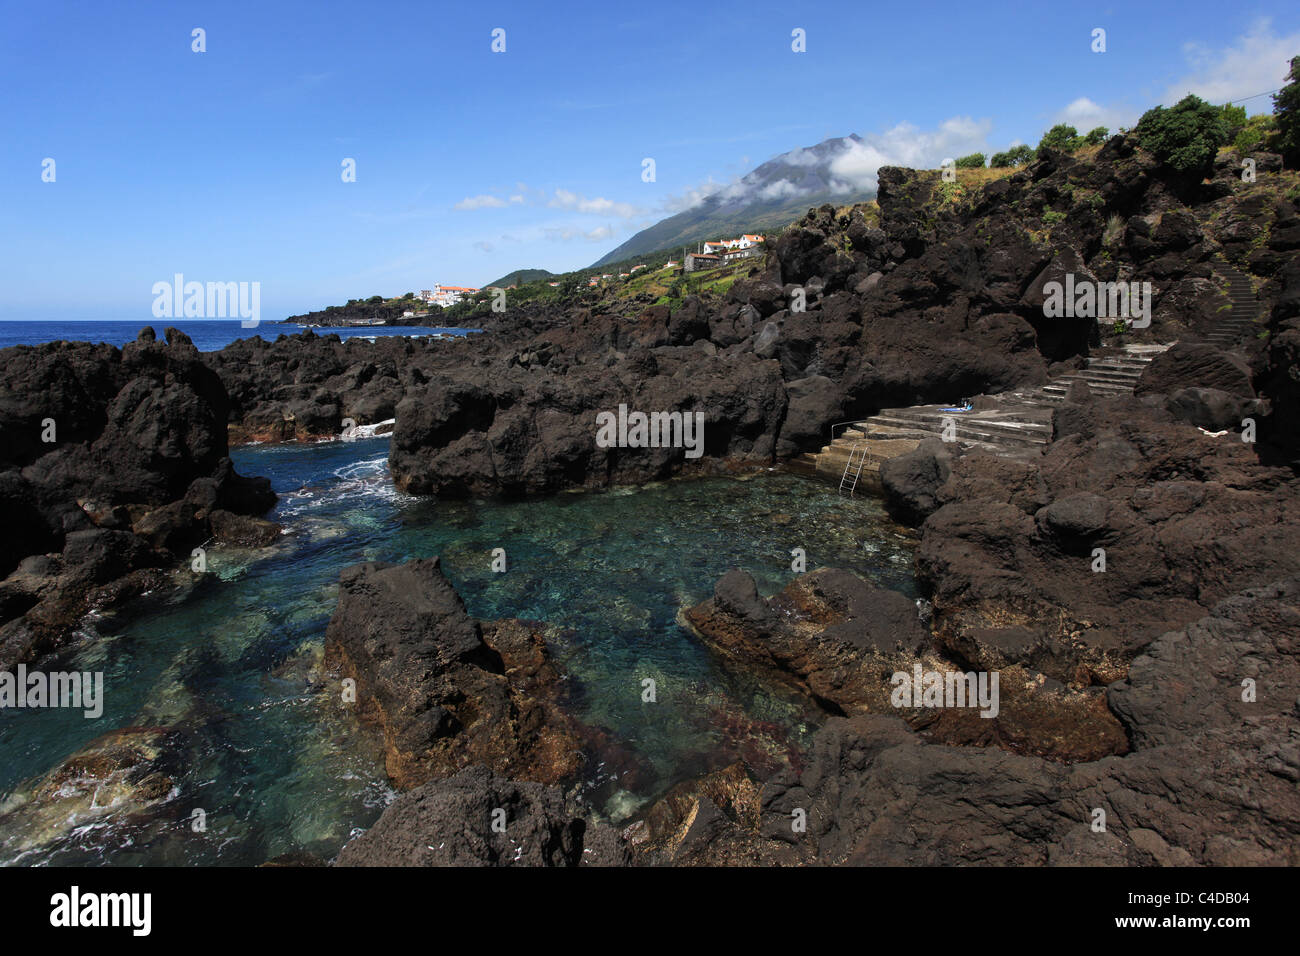 A panoramic view of a saltwater natural swimming pool in São João, Pico island, Azores, overlooking Pico mountain Stock Photo